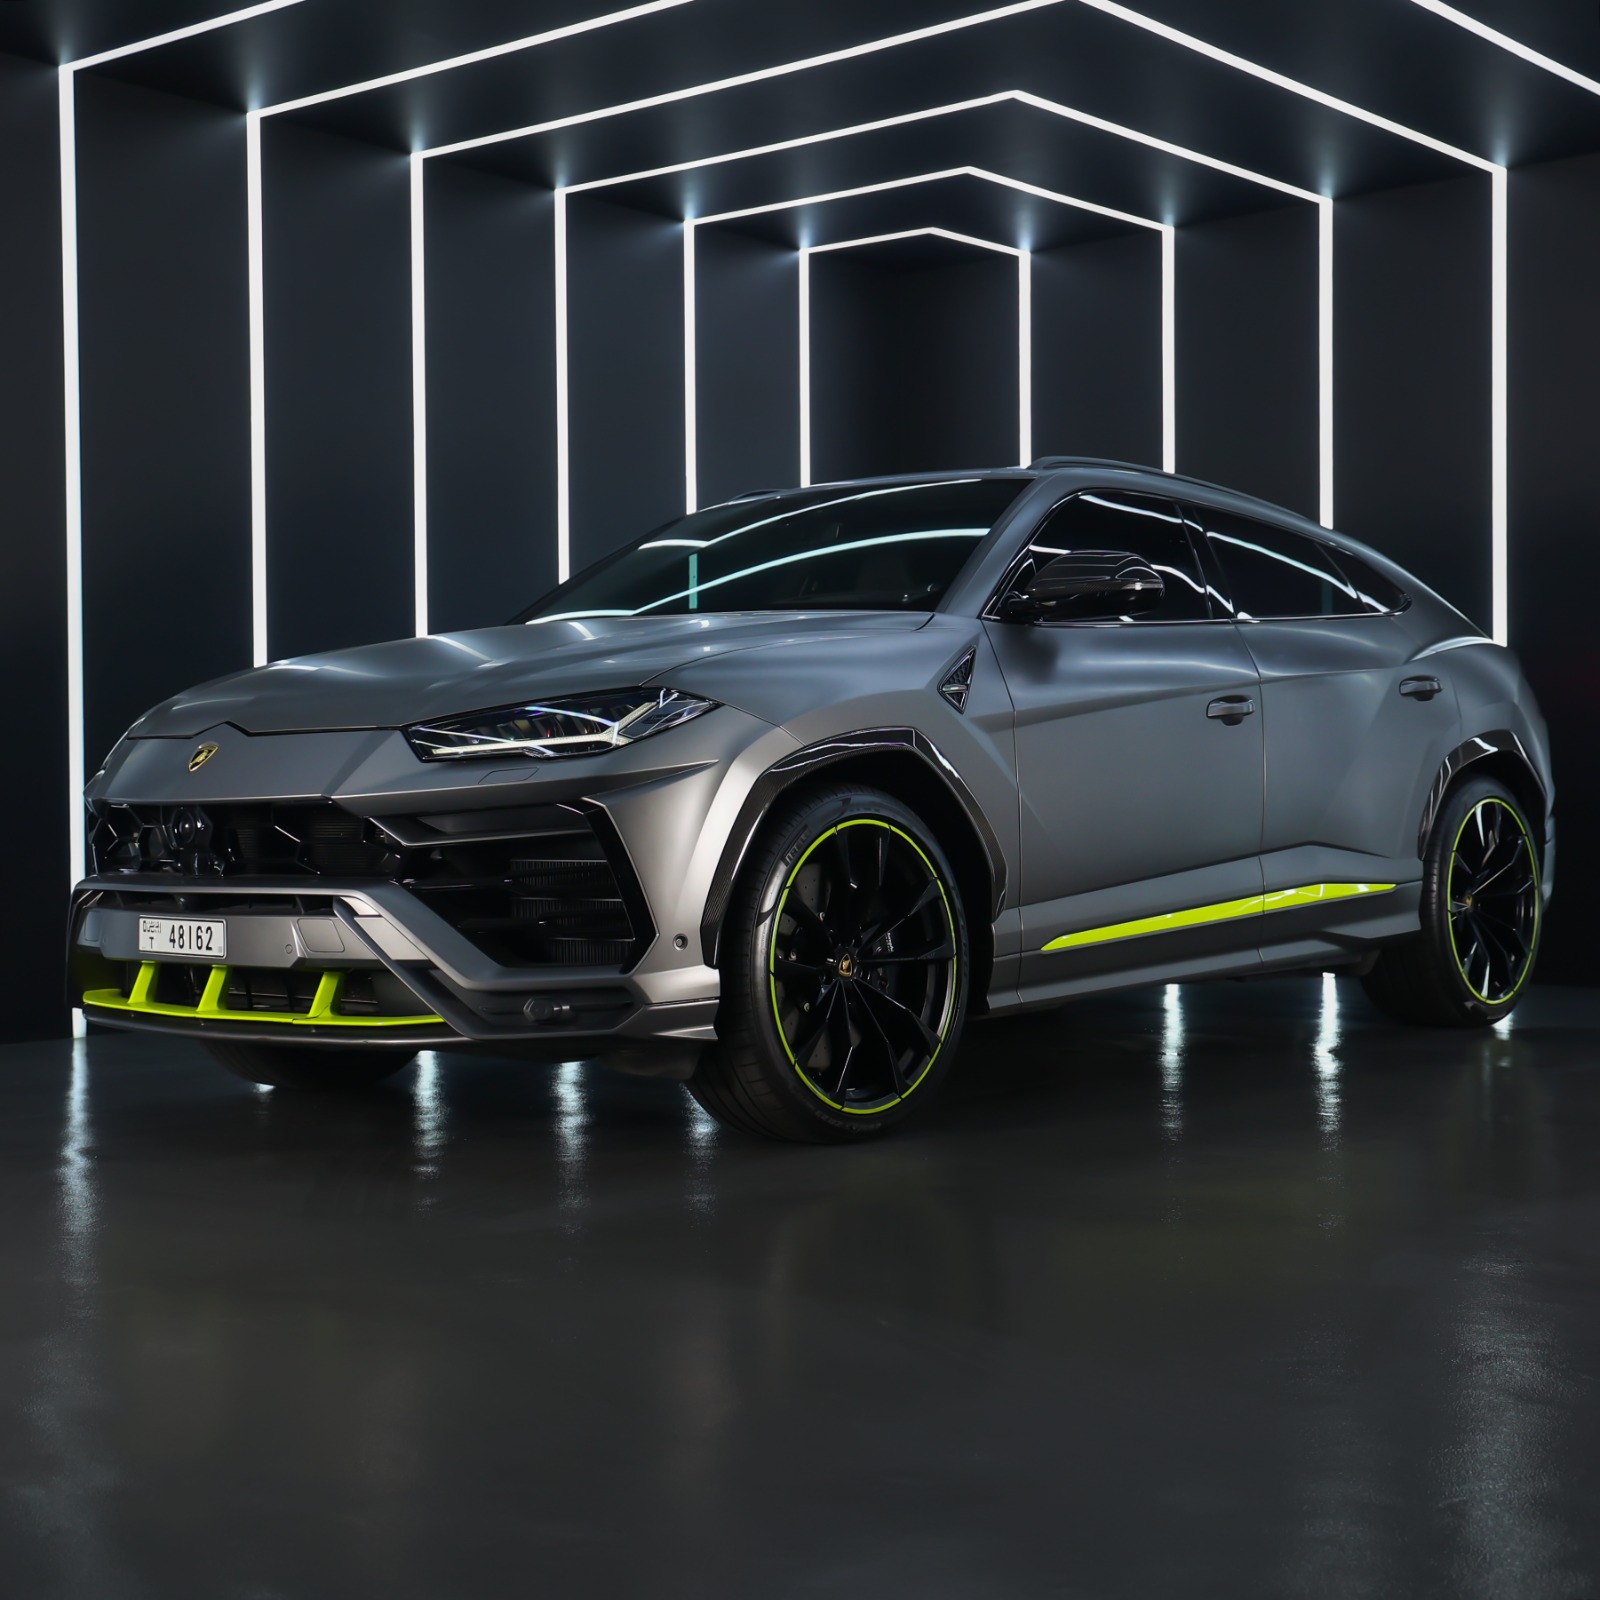 Hire Lamborghini Urus 2023 Rental car Dubai Listed By Luxury Car For Rental In Dubai - Affordable - Cheap Car Rental From AED 30/Day , Rent a car Dubai AED 900 per month | 25% off on Monthly Car rentals & lease